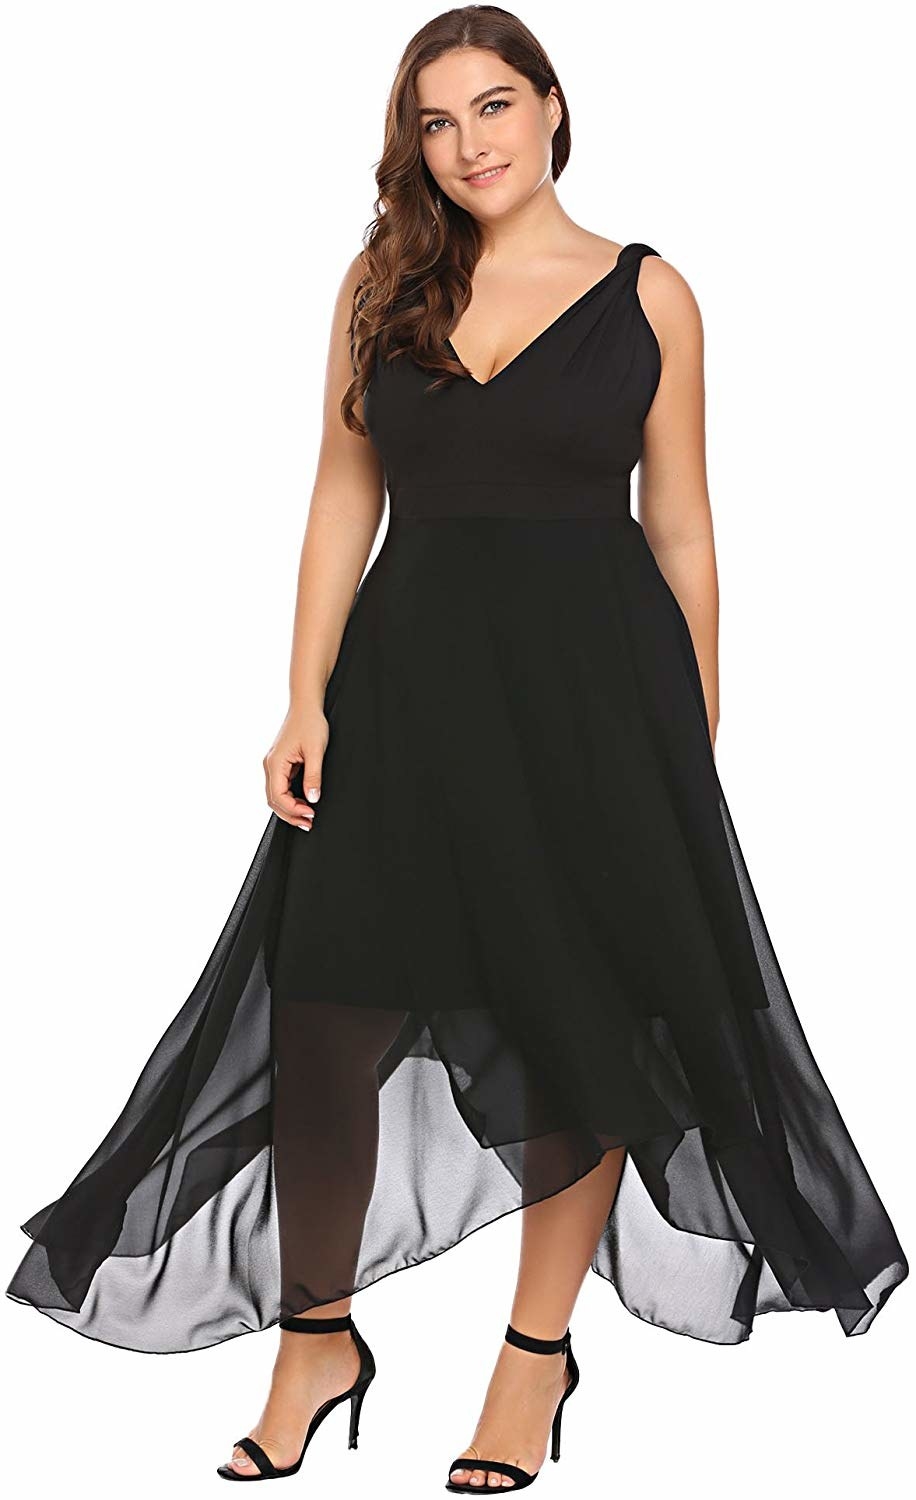 31 Of The Best Formal Dresses You Can Get On Amazon